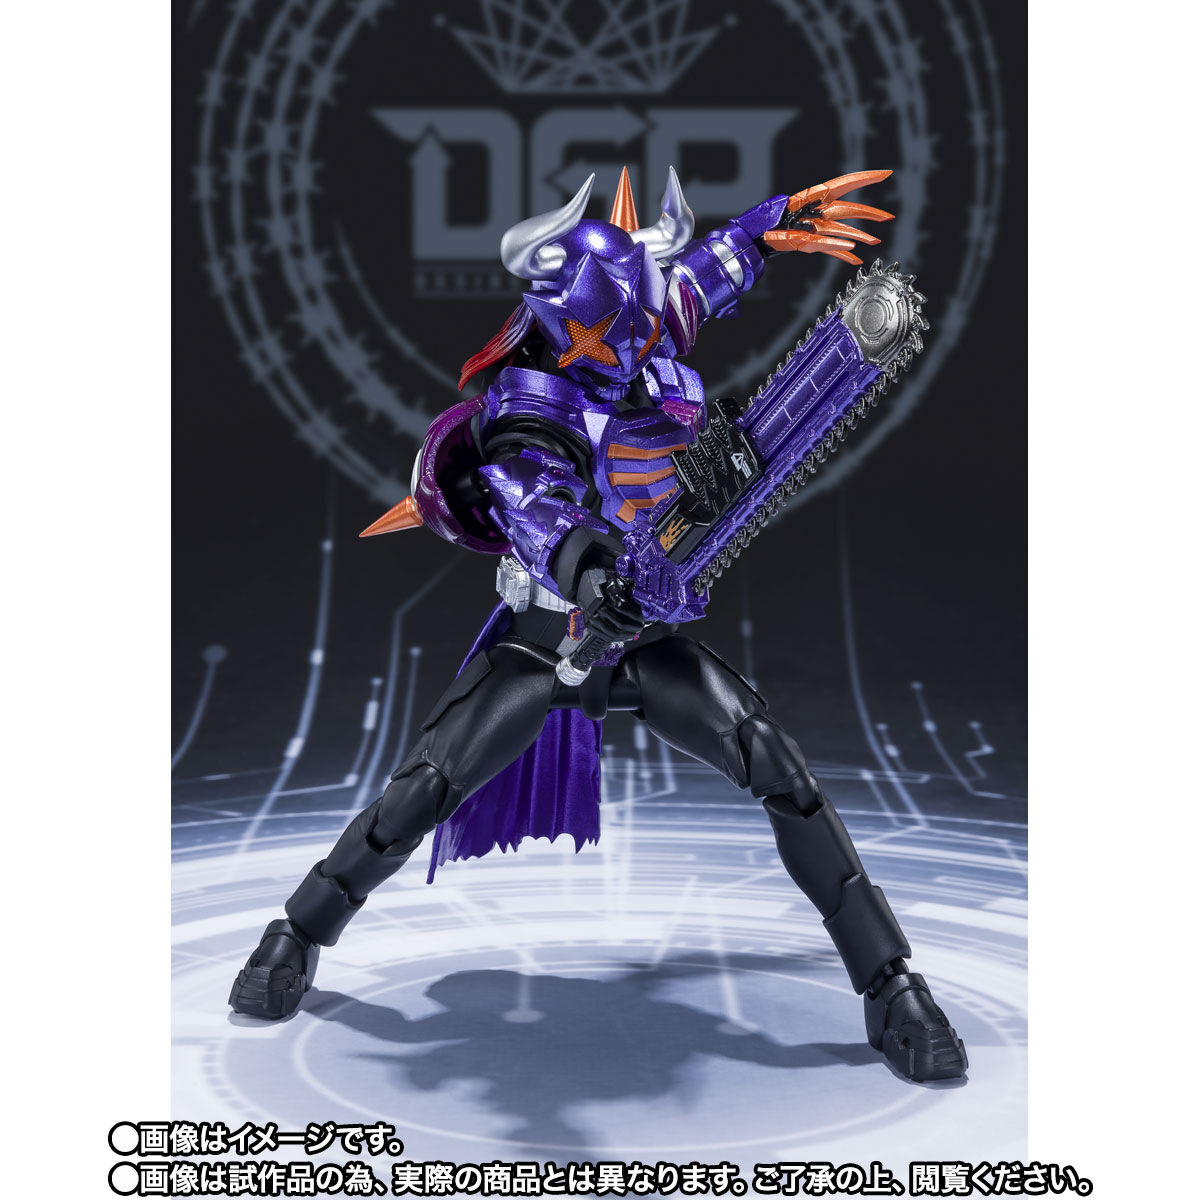 S.H.Figuarts 仮面ライダーバッファ ゾンビフォーム | 仮面ライダー